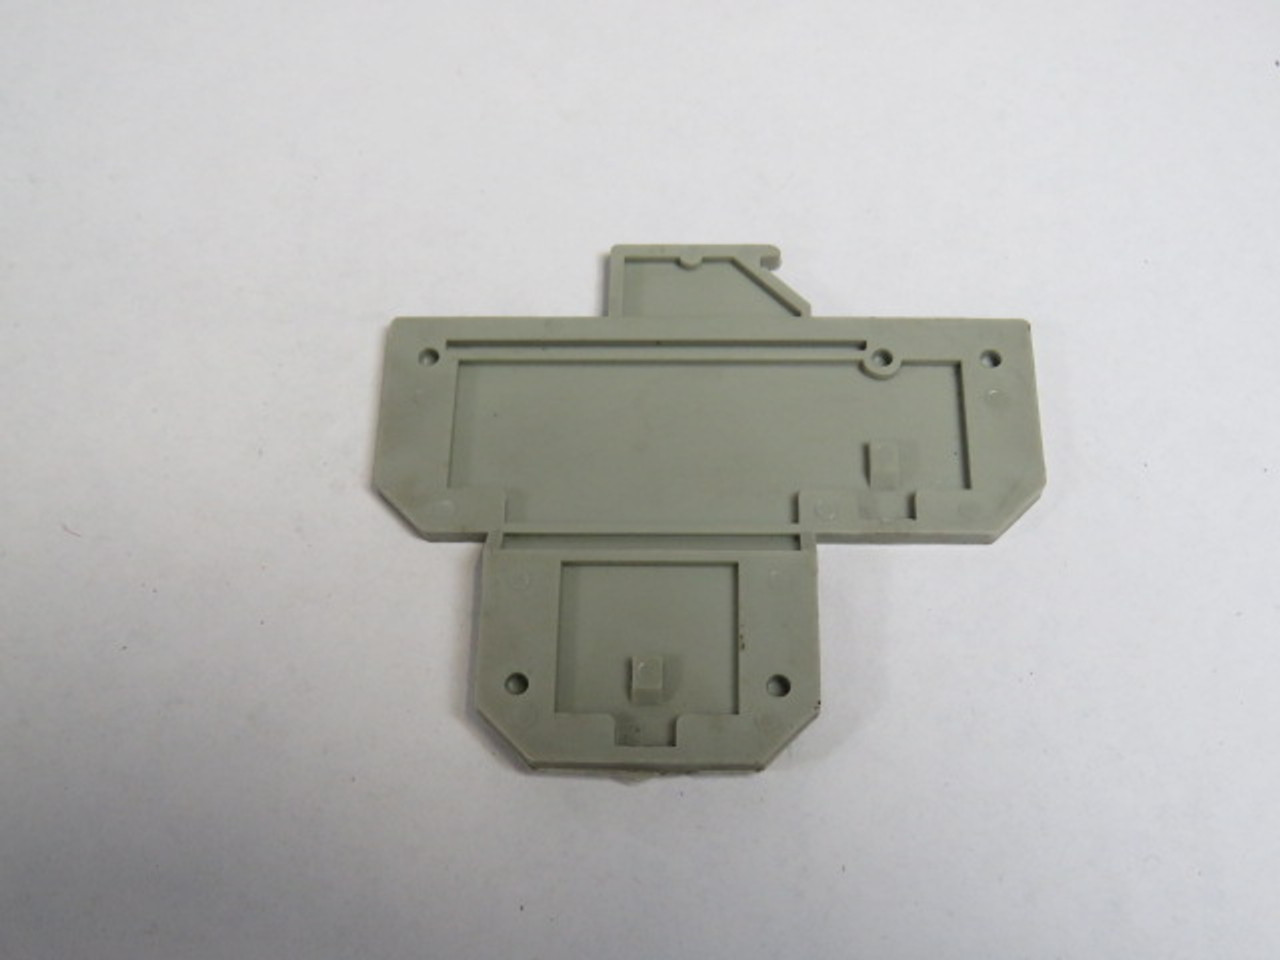 Phoenix Contact D-KKB3 Terminal Block End Cover USED